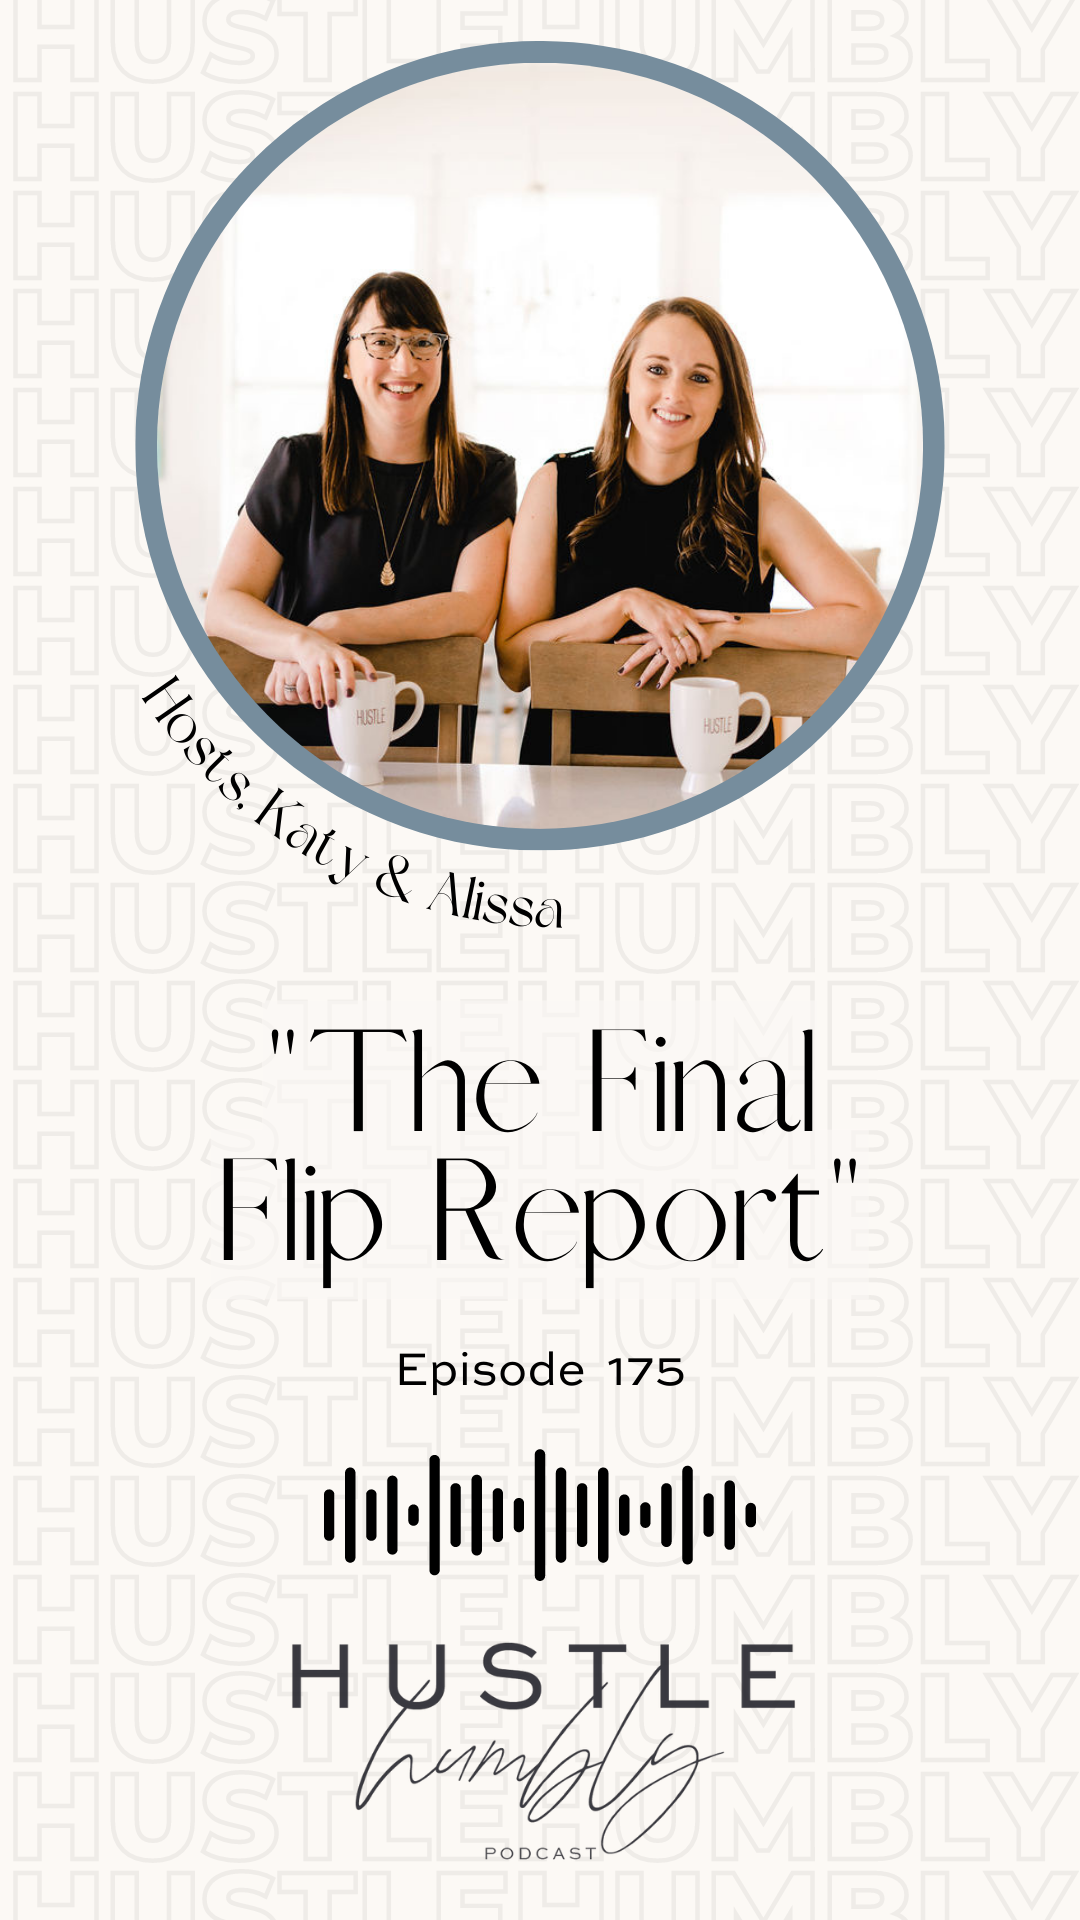 Hustle Humbly Podcast Episode 175: The FINAL Flip Report